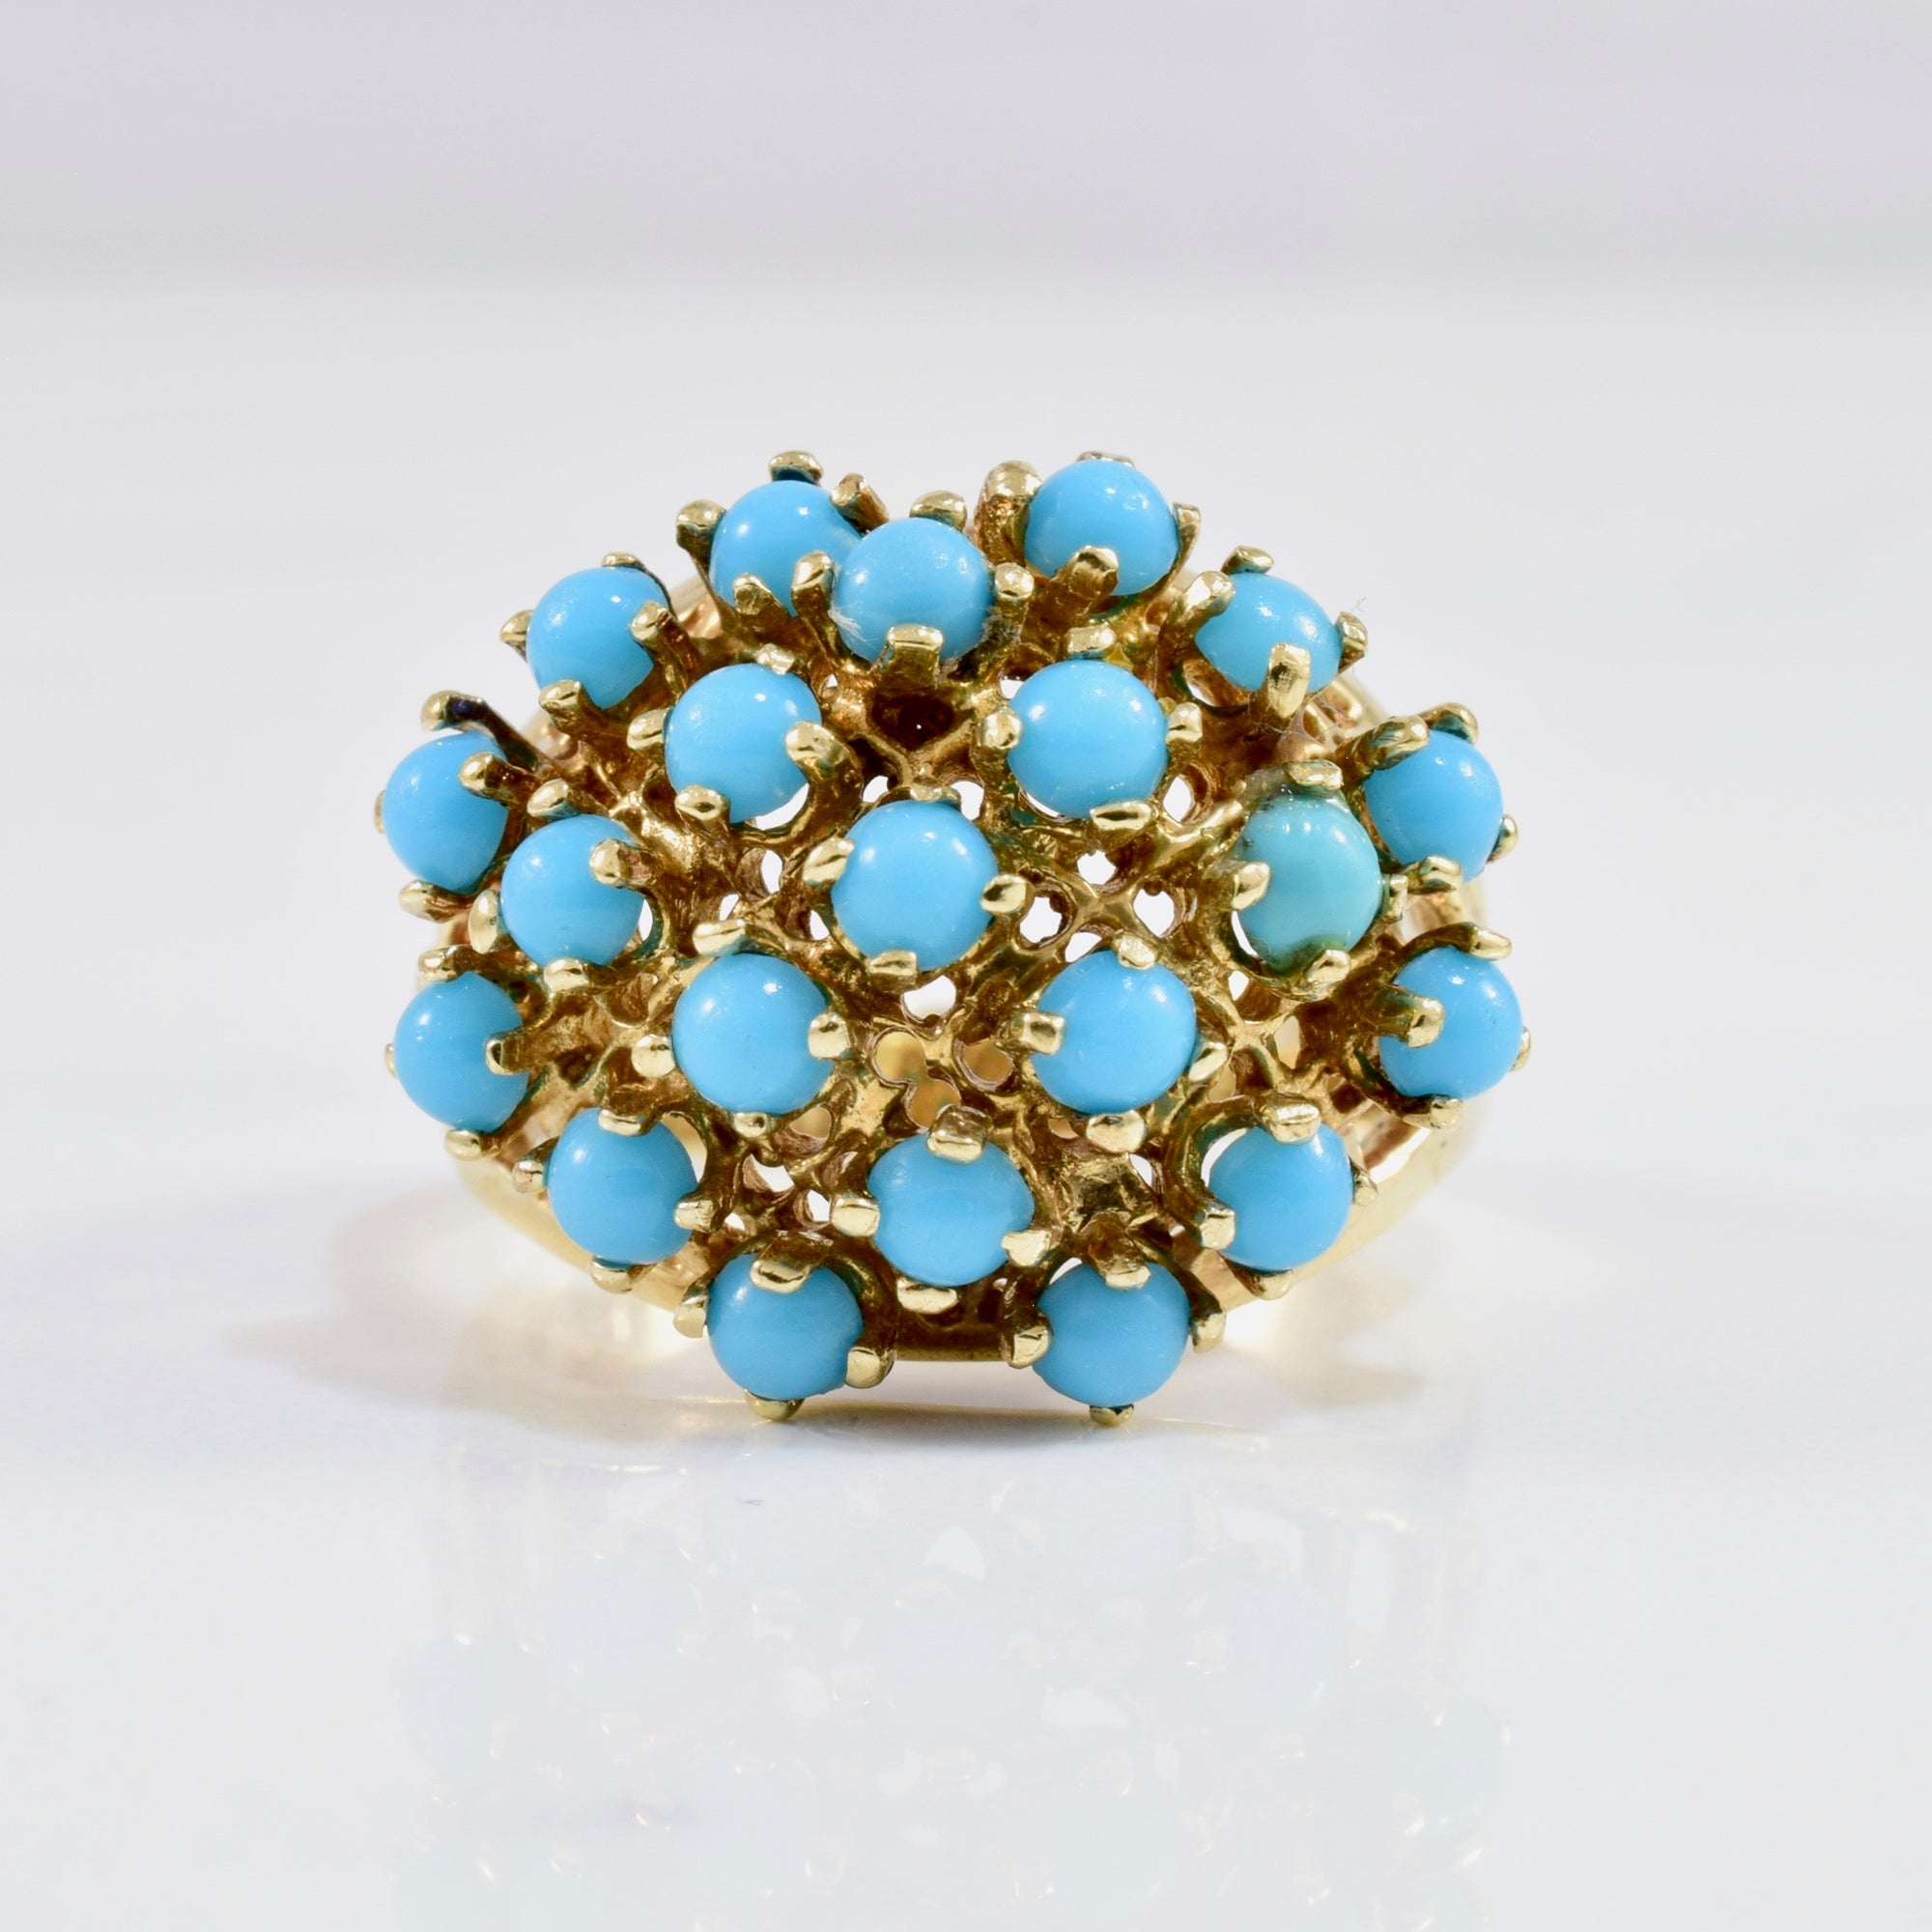 Turquoise Cluster Ring | SZ 7.25 |